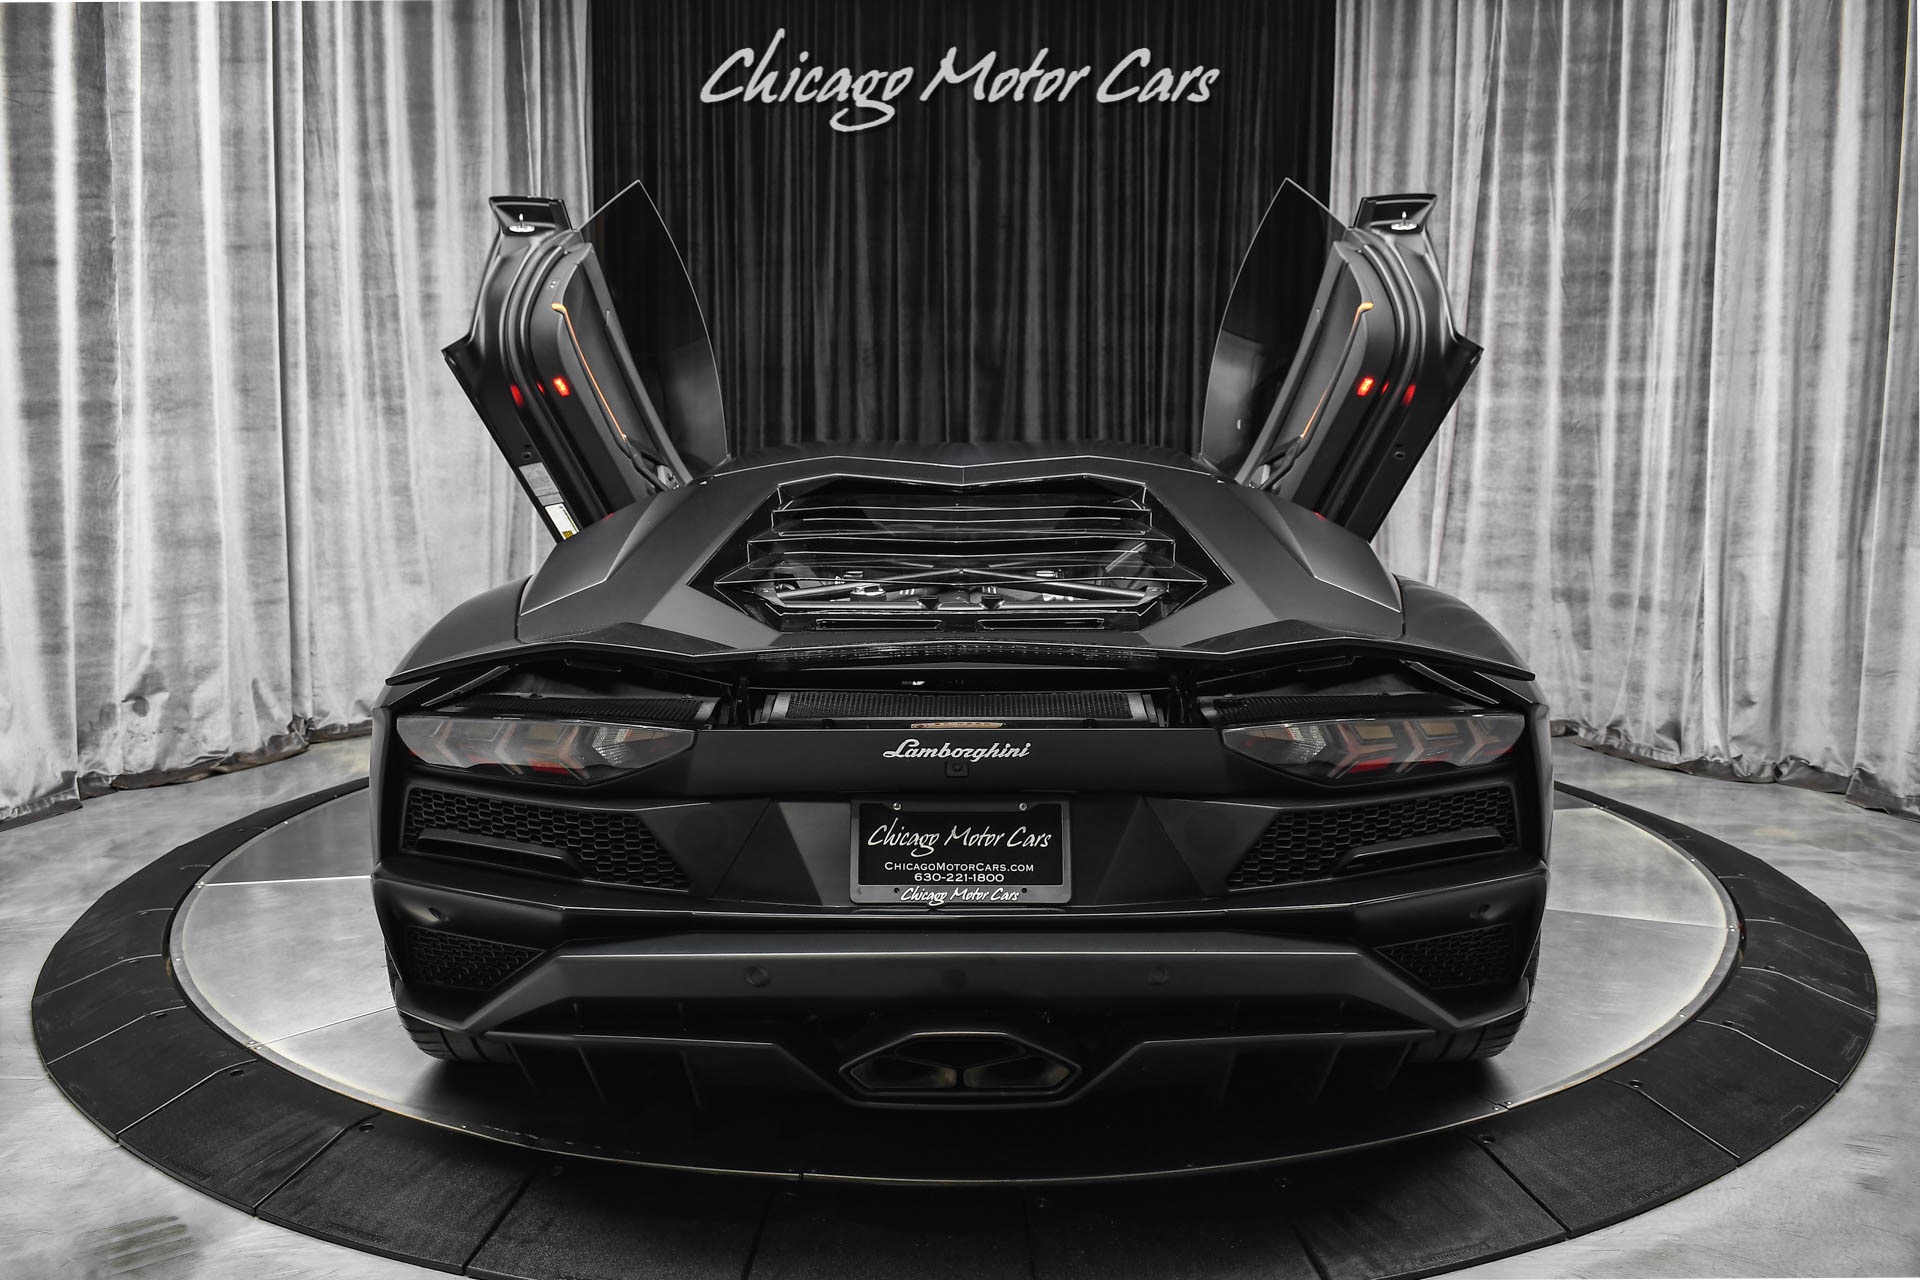 Used-2018-Lamborghini-Aventador-LP740-4-S-Coupe-HUGE-MSRP-THOUSANDS-IN-UPGRADES-ADV1-Wheels-IPE-Exhaust